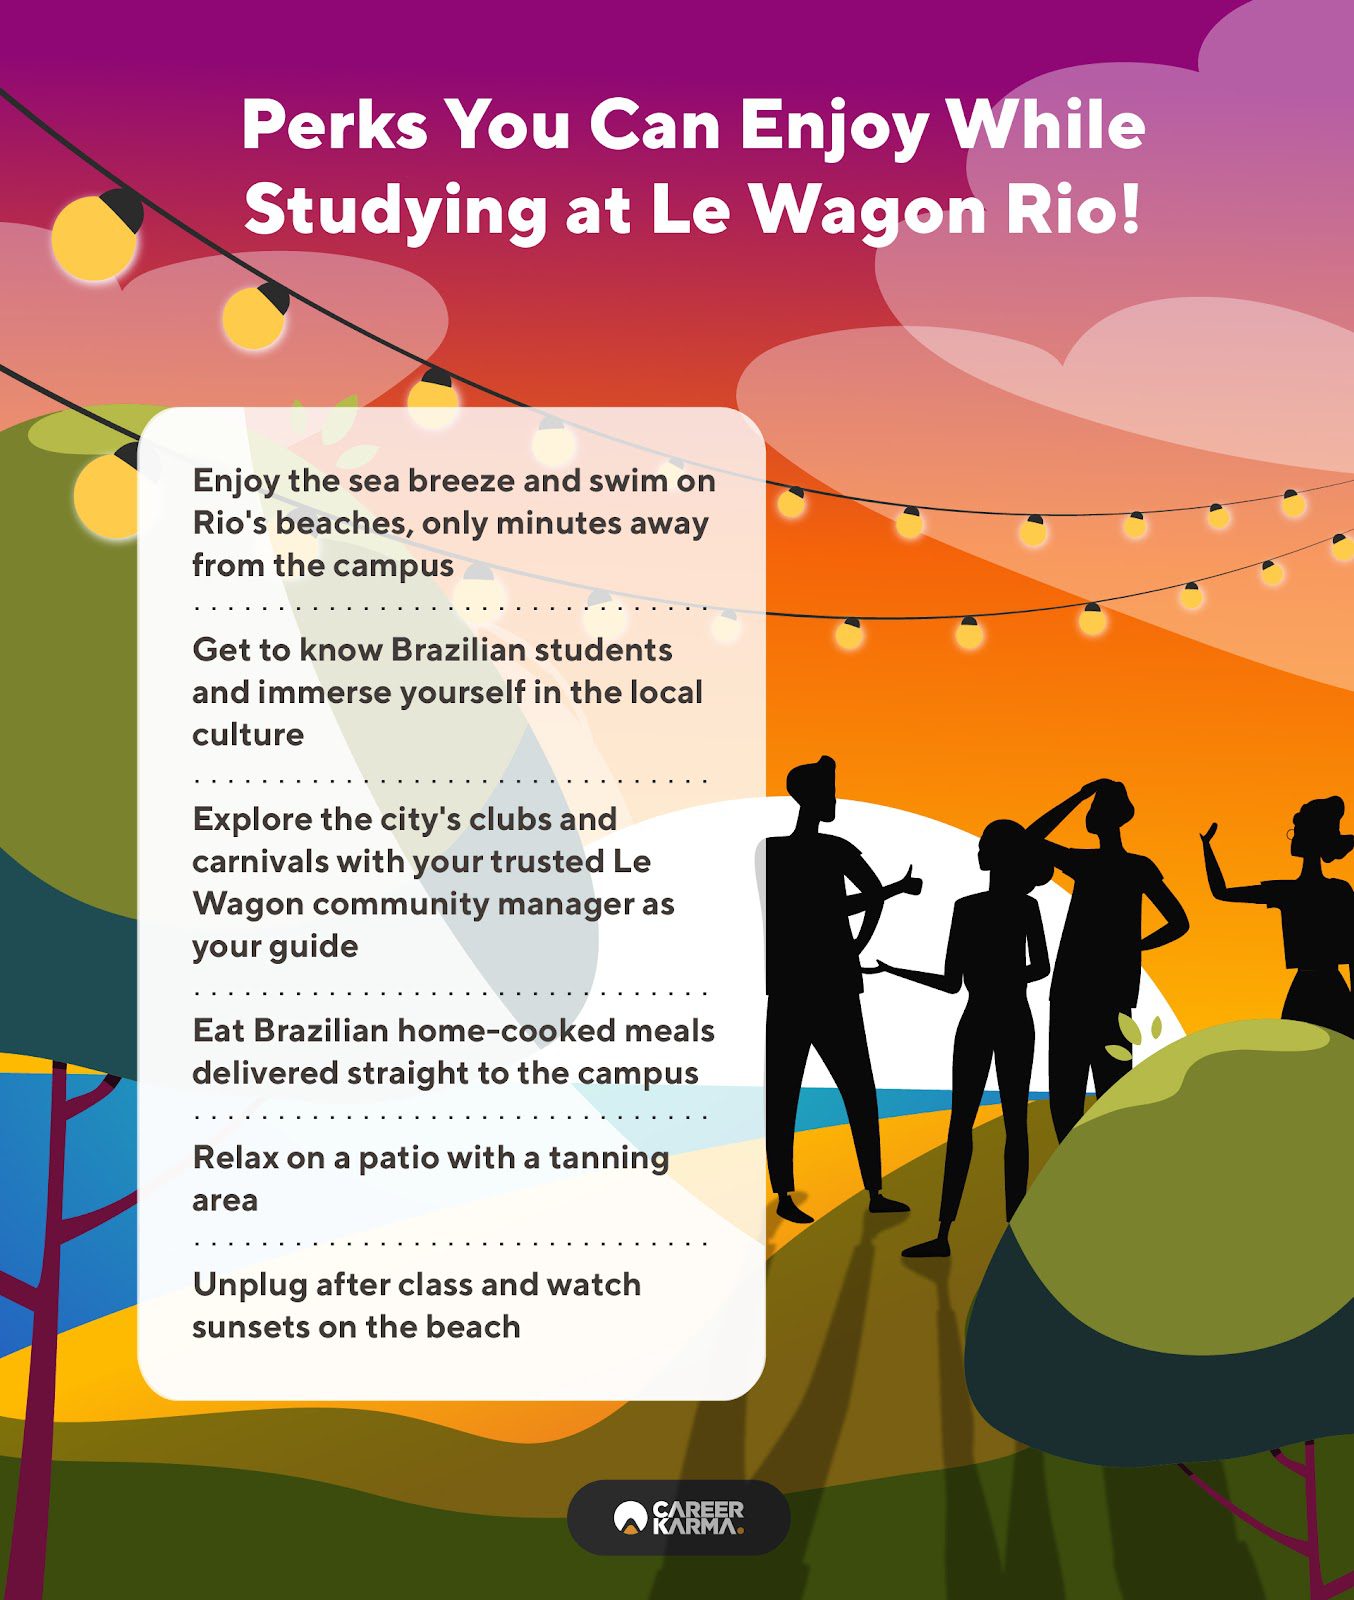 An infographic highlighting the perks of enrolling at Le Wagon’s campus in Rio, Brazil